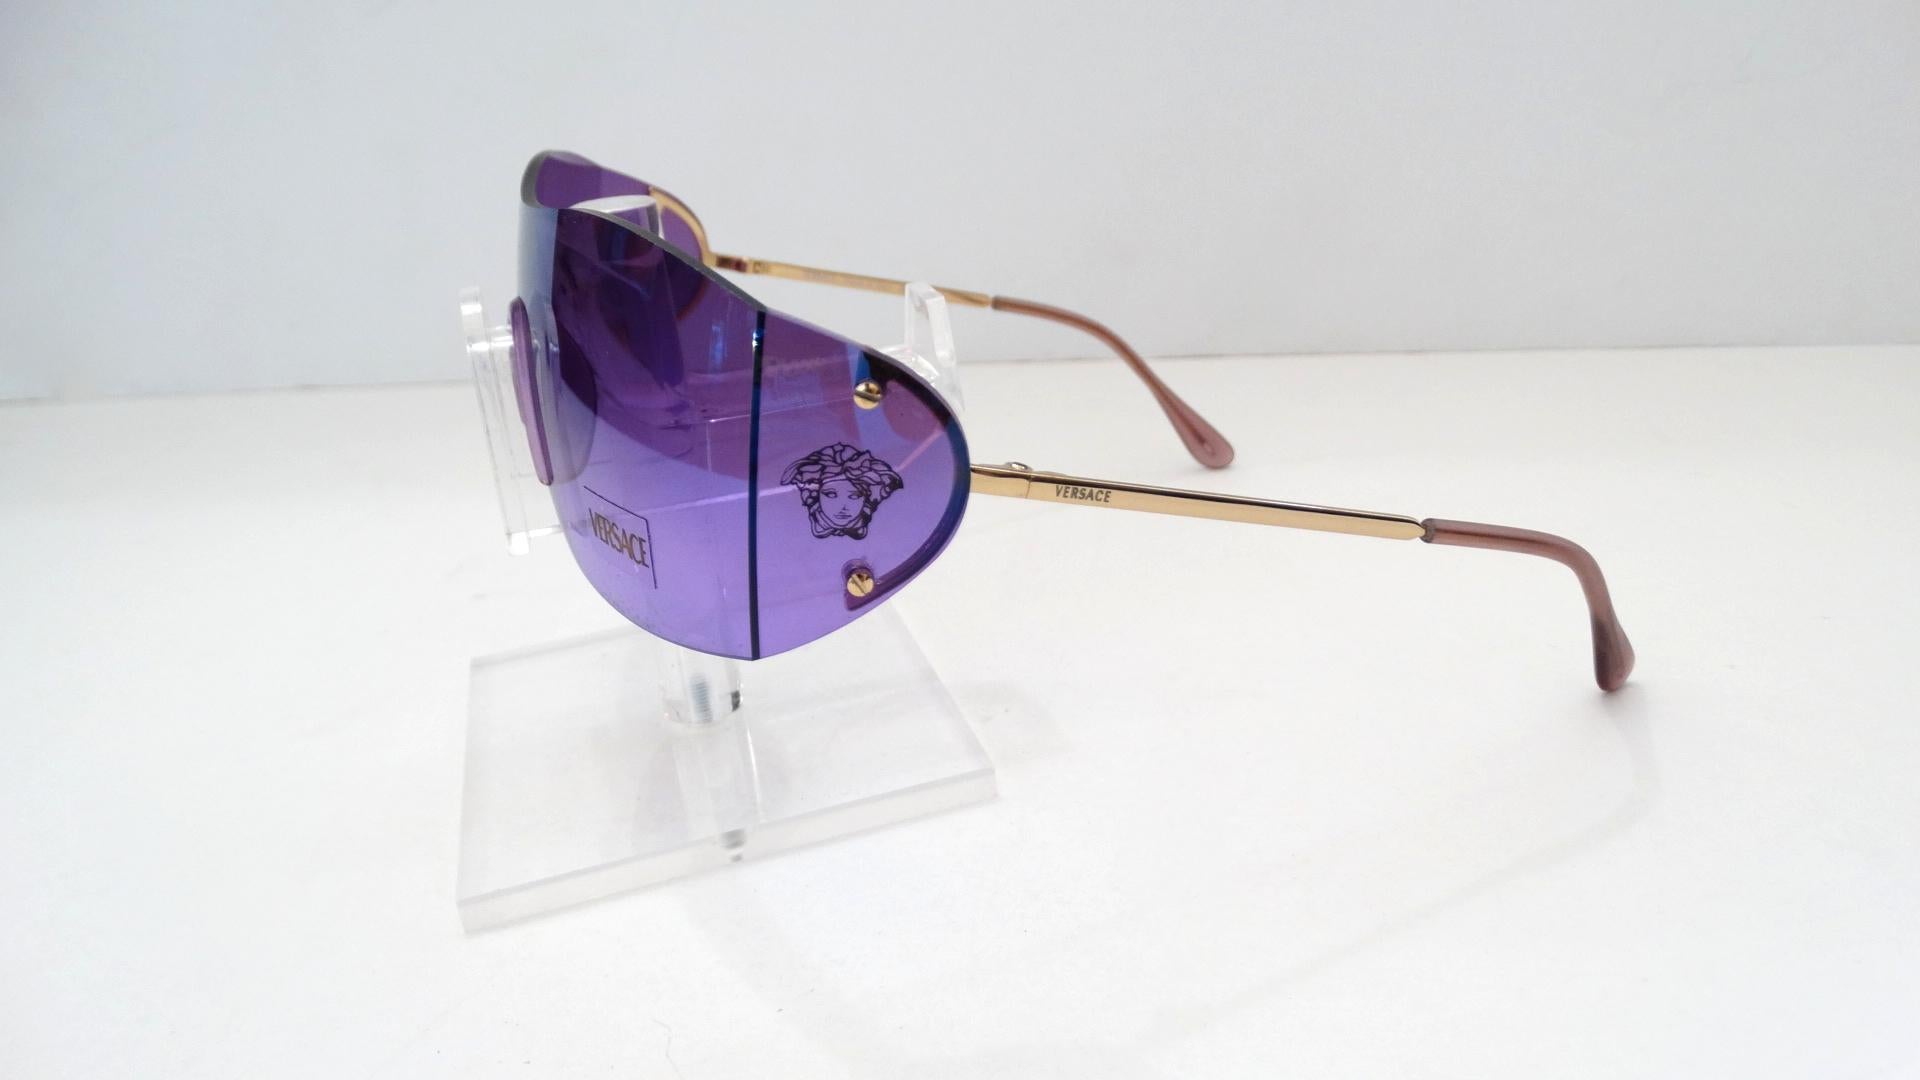 The Perfect Pair Of Sunglasses For Your Street Chic Street Style! Circa 1990s, these dead stock Versace shield sunglasses feature purple iridescent lenses, silver hardware and light purple arm covers. The side of the sunglasses are stamped with the